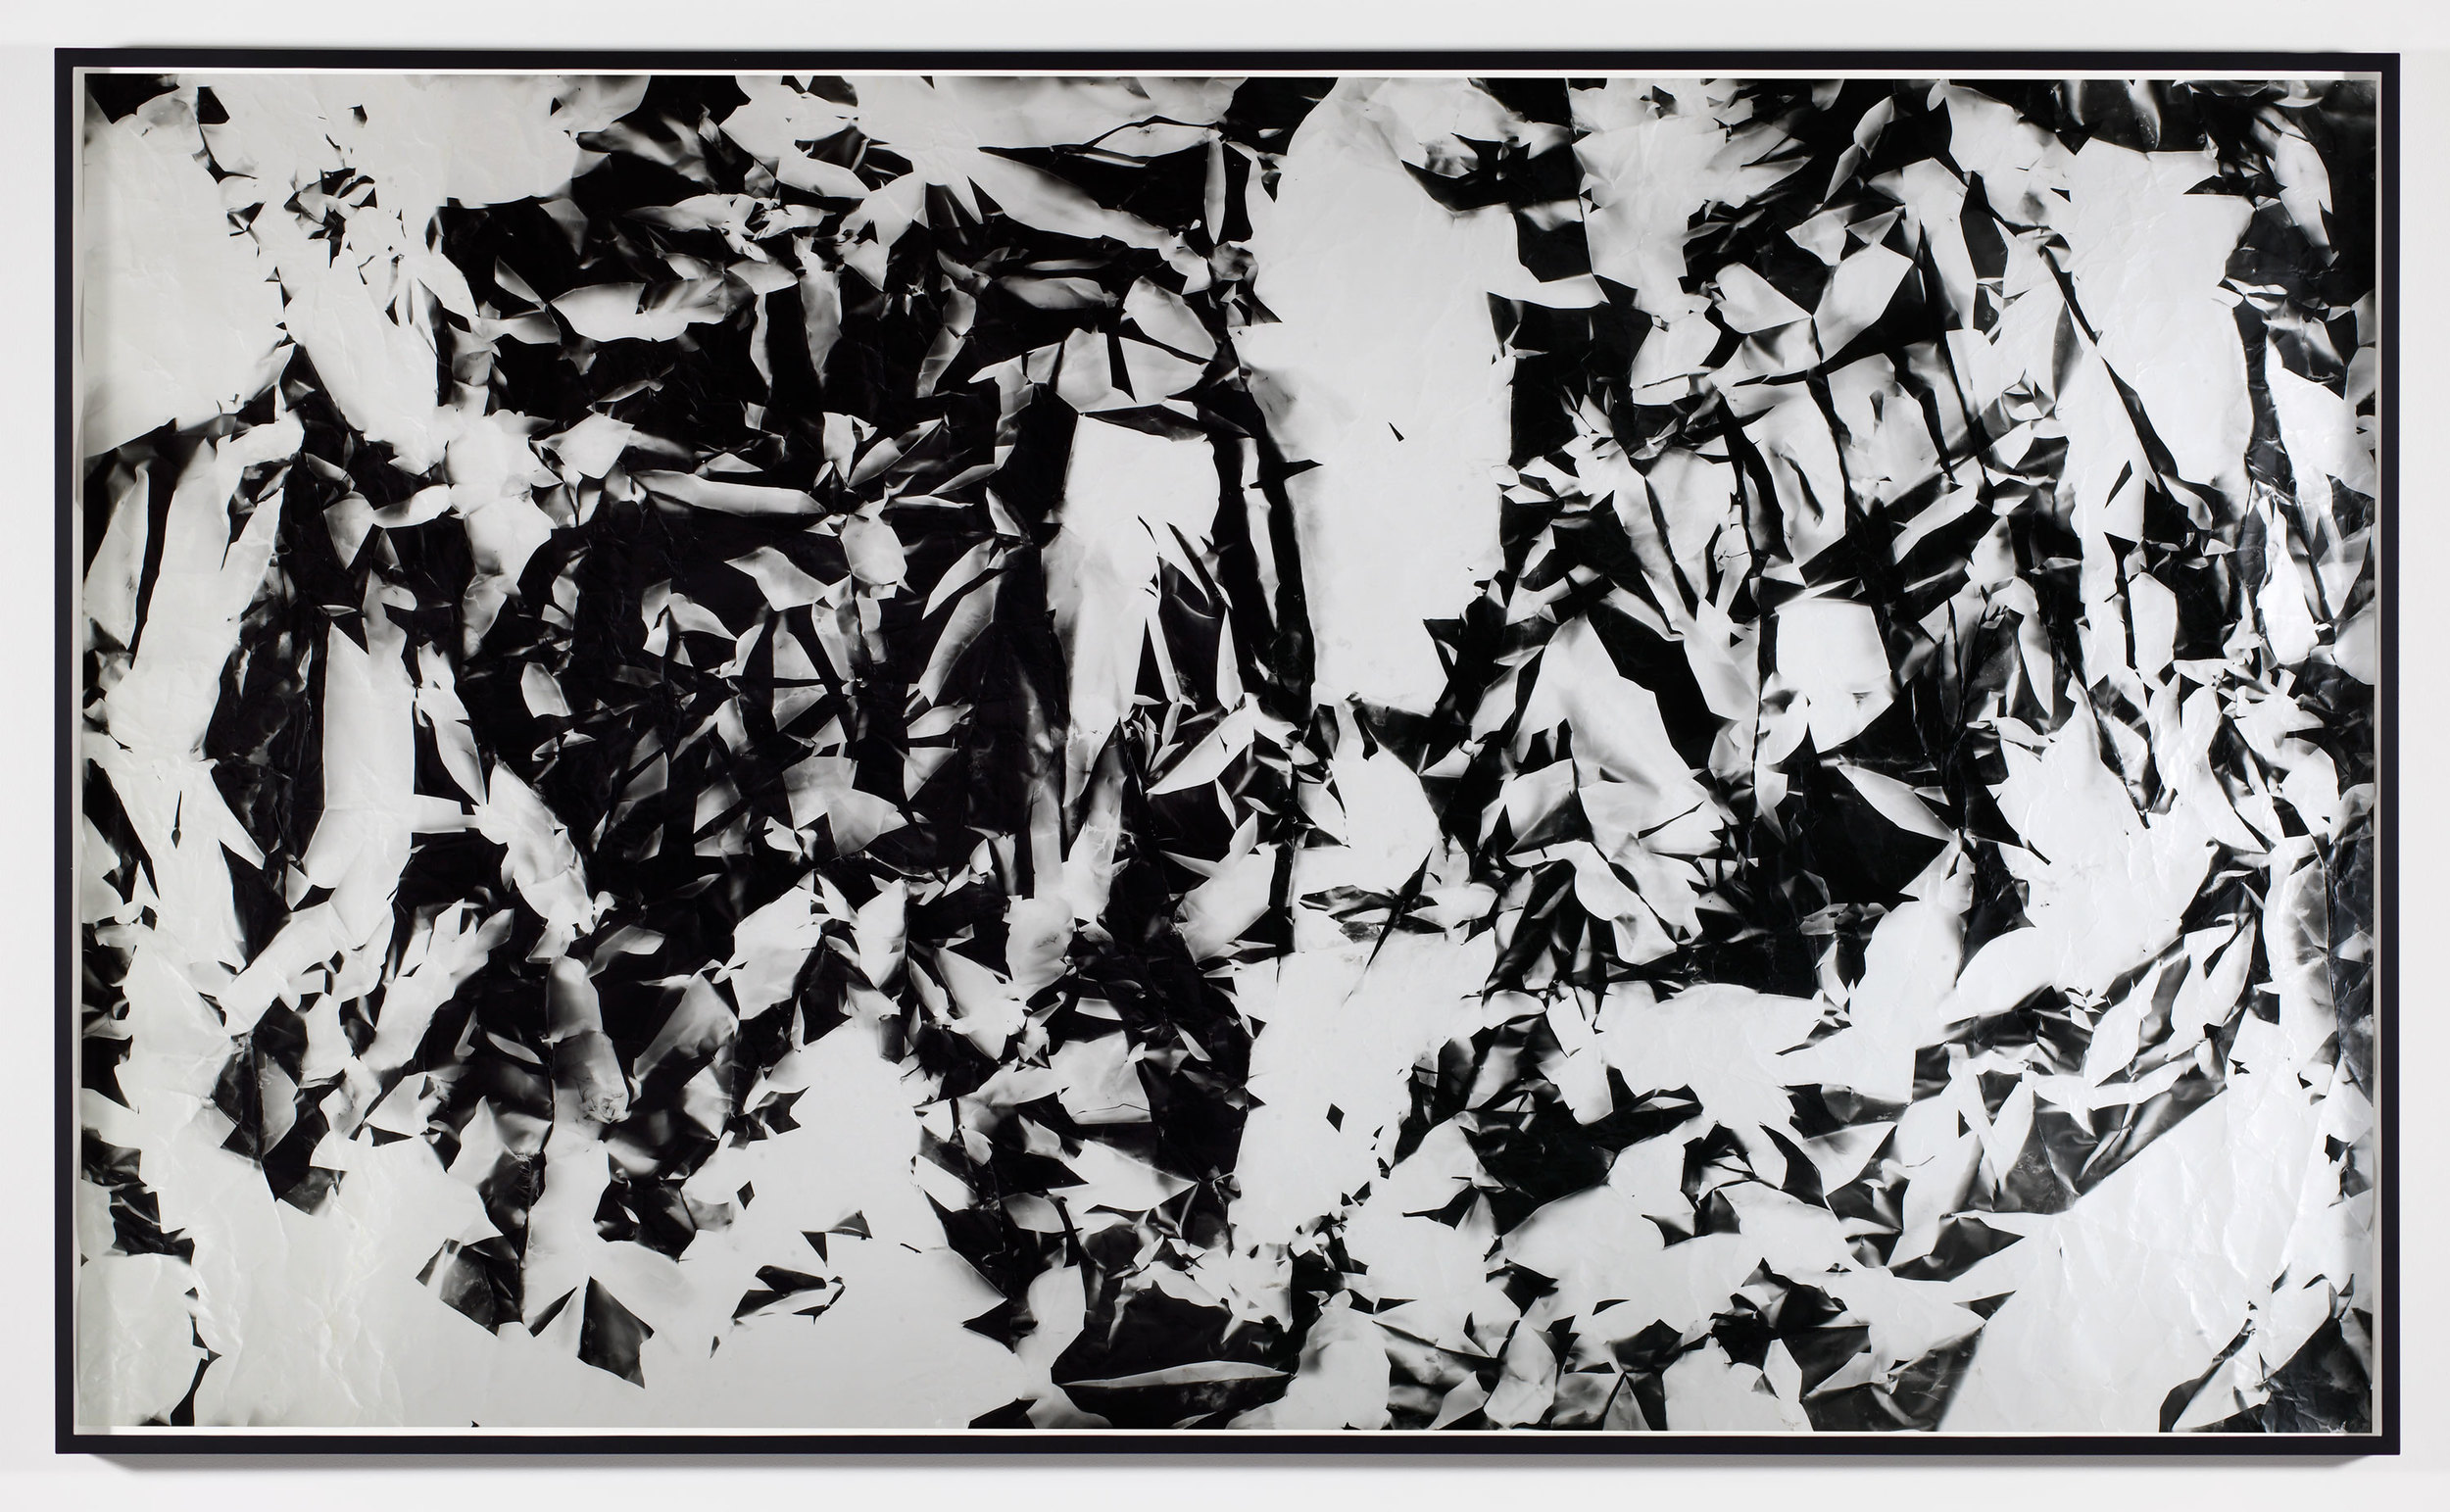   Picture Made by My Hand with the Assistance of Light    2011   Black and white fiber based photographic paper  55 inches   Pictures Made by My Hand with the Assistance of Light, 2005–2014     